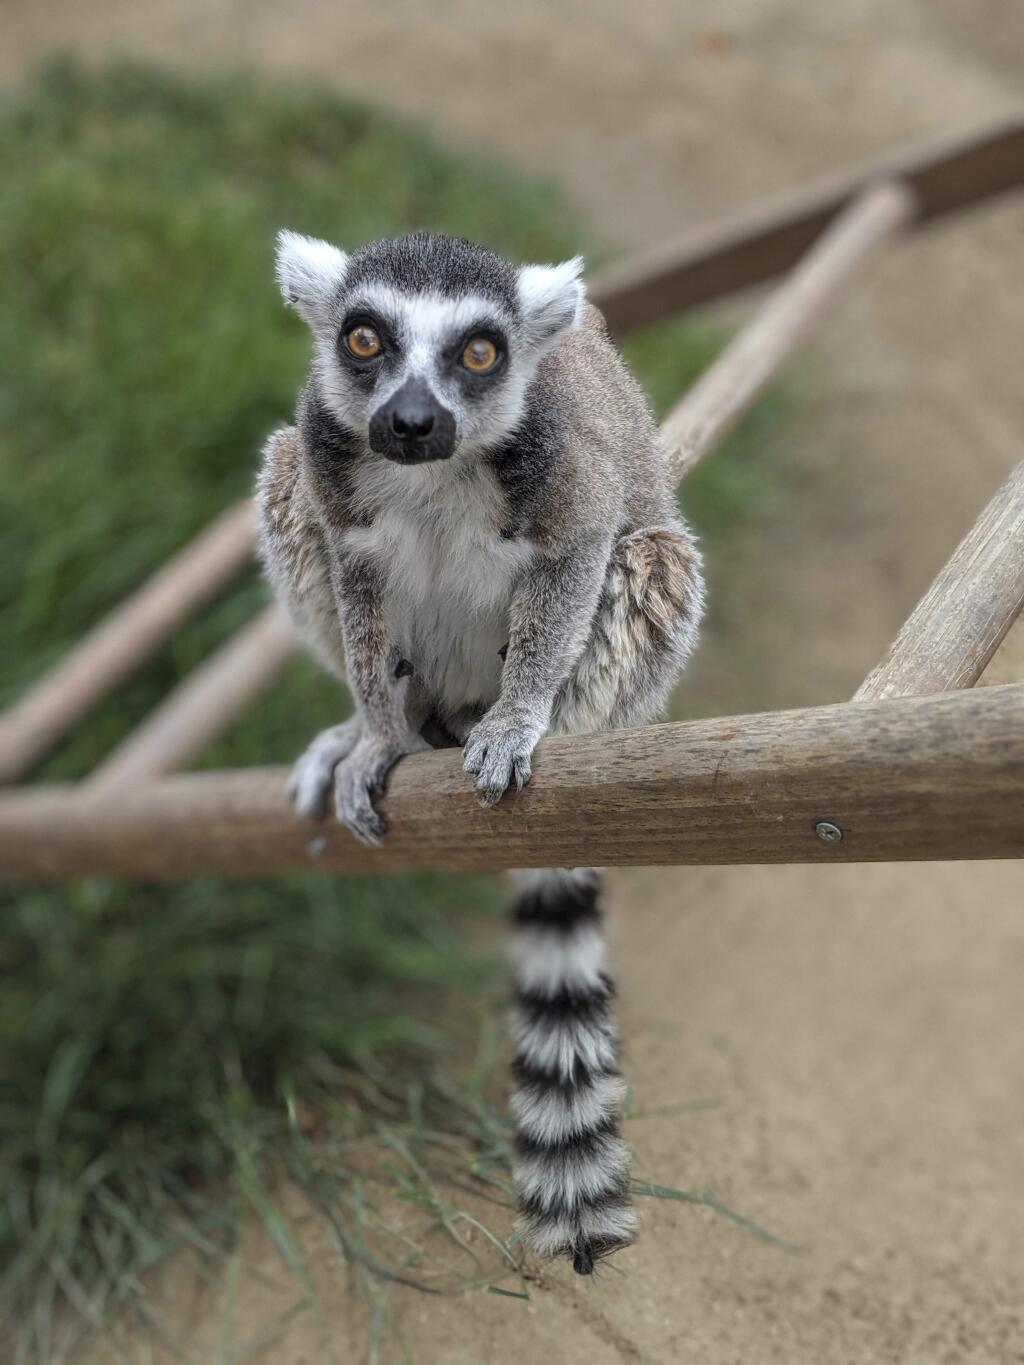 This undated photo provided by the Santa Ana Zoo shows a ring-tailed lemur at the Santa Ana Zoo in Santa Ana, Calif. The U.S. Attorney's Office says 19-year-old Aquinas Kasbar of Newport Beach agreed to plead guilty to one misdemeanor count of unlawfully taking an endangered species. (Santa Ana Zoo via AP)